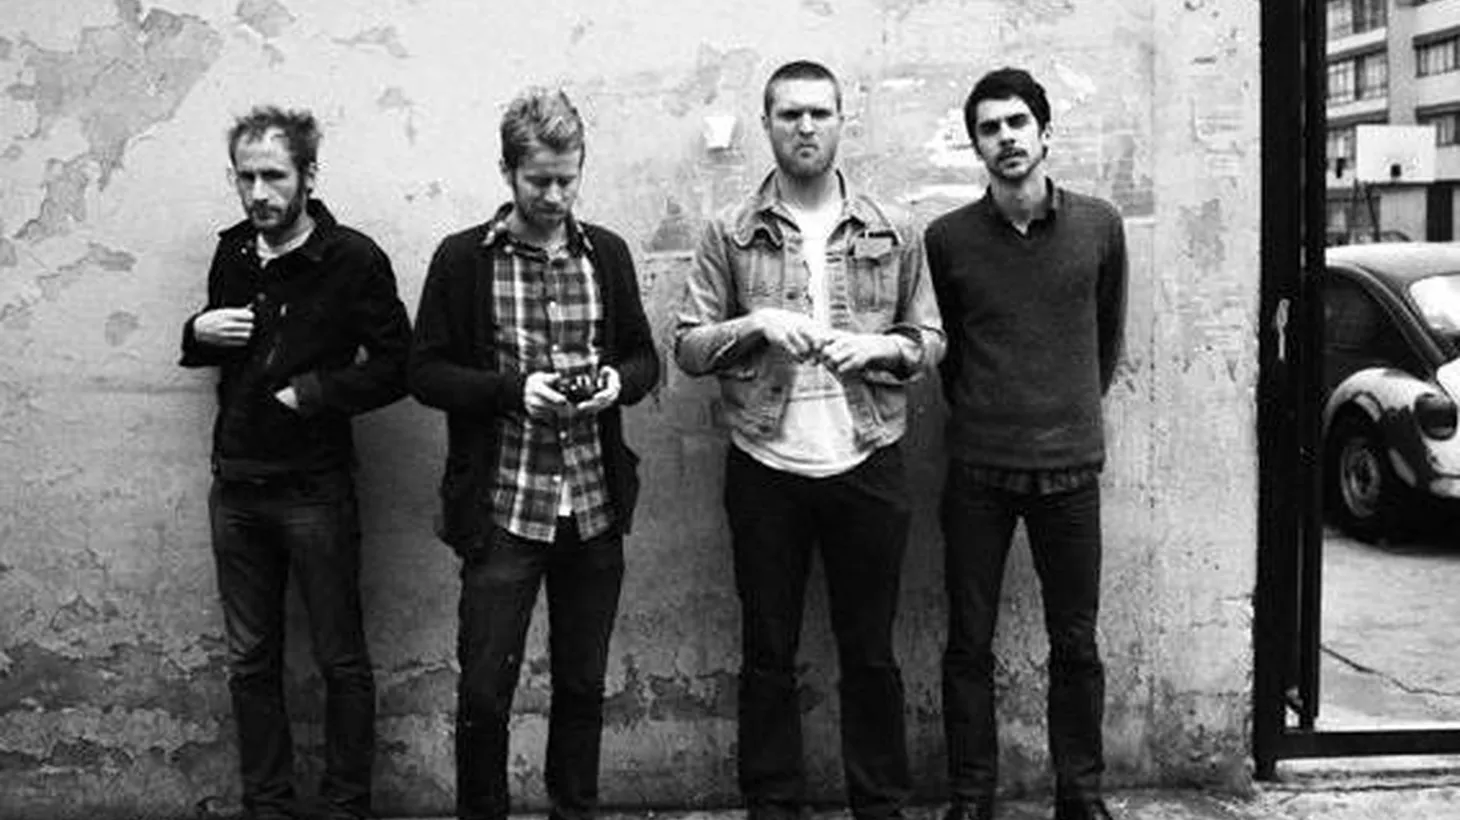 From their humble beginnings in a practice space atop a Fullerton restaurant, Cold War Kids have steadily built a global fan base for their riveting, blues-infused rock. Hear and watch them live when they perform on Morning Becomes Eclectic at 11:15am.